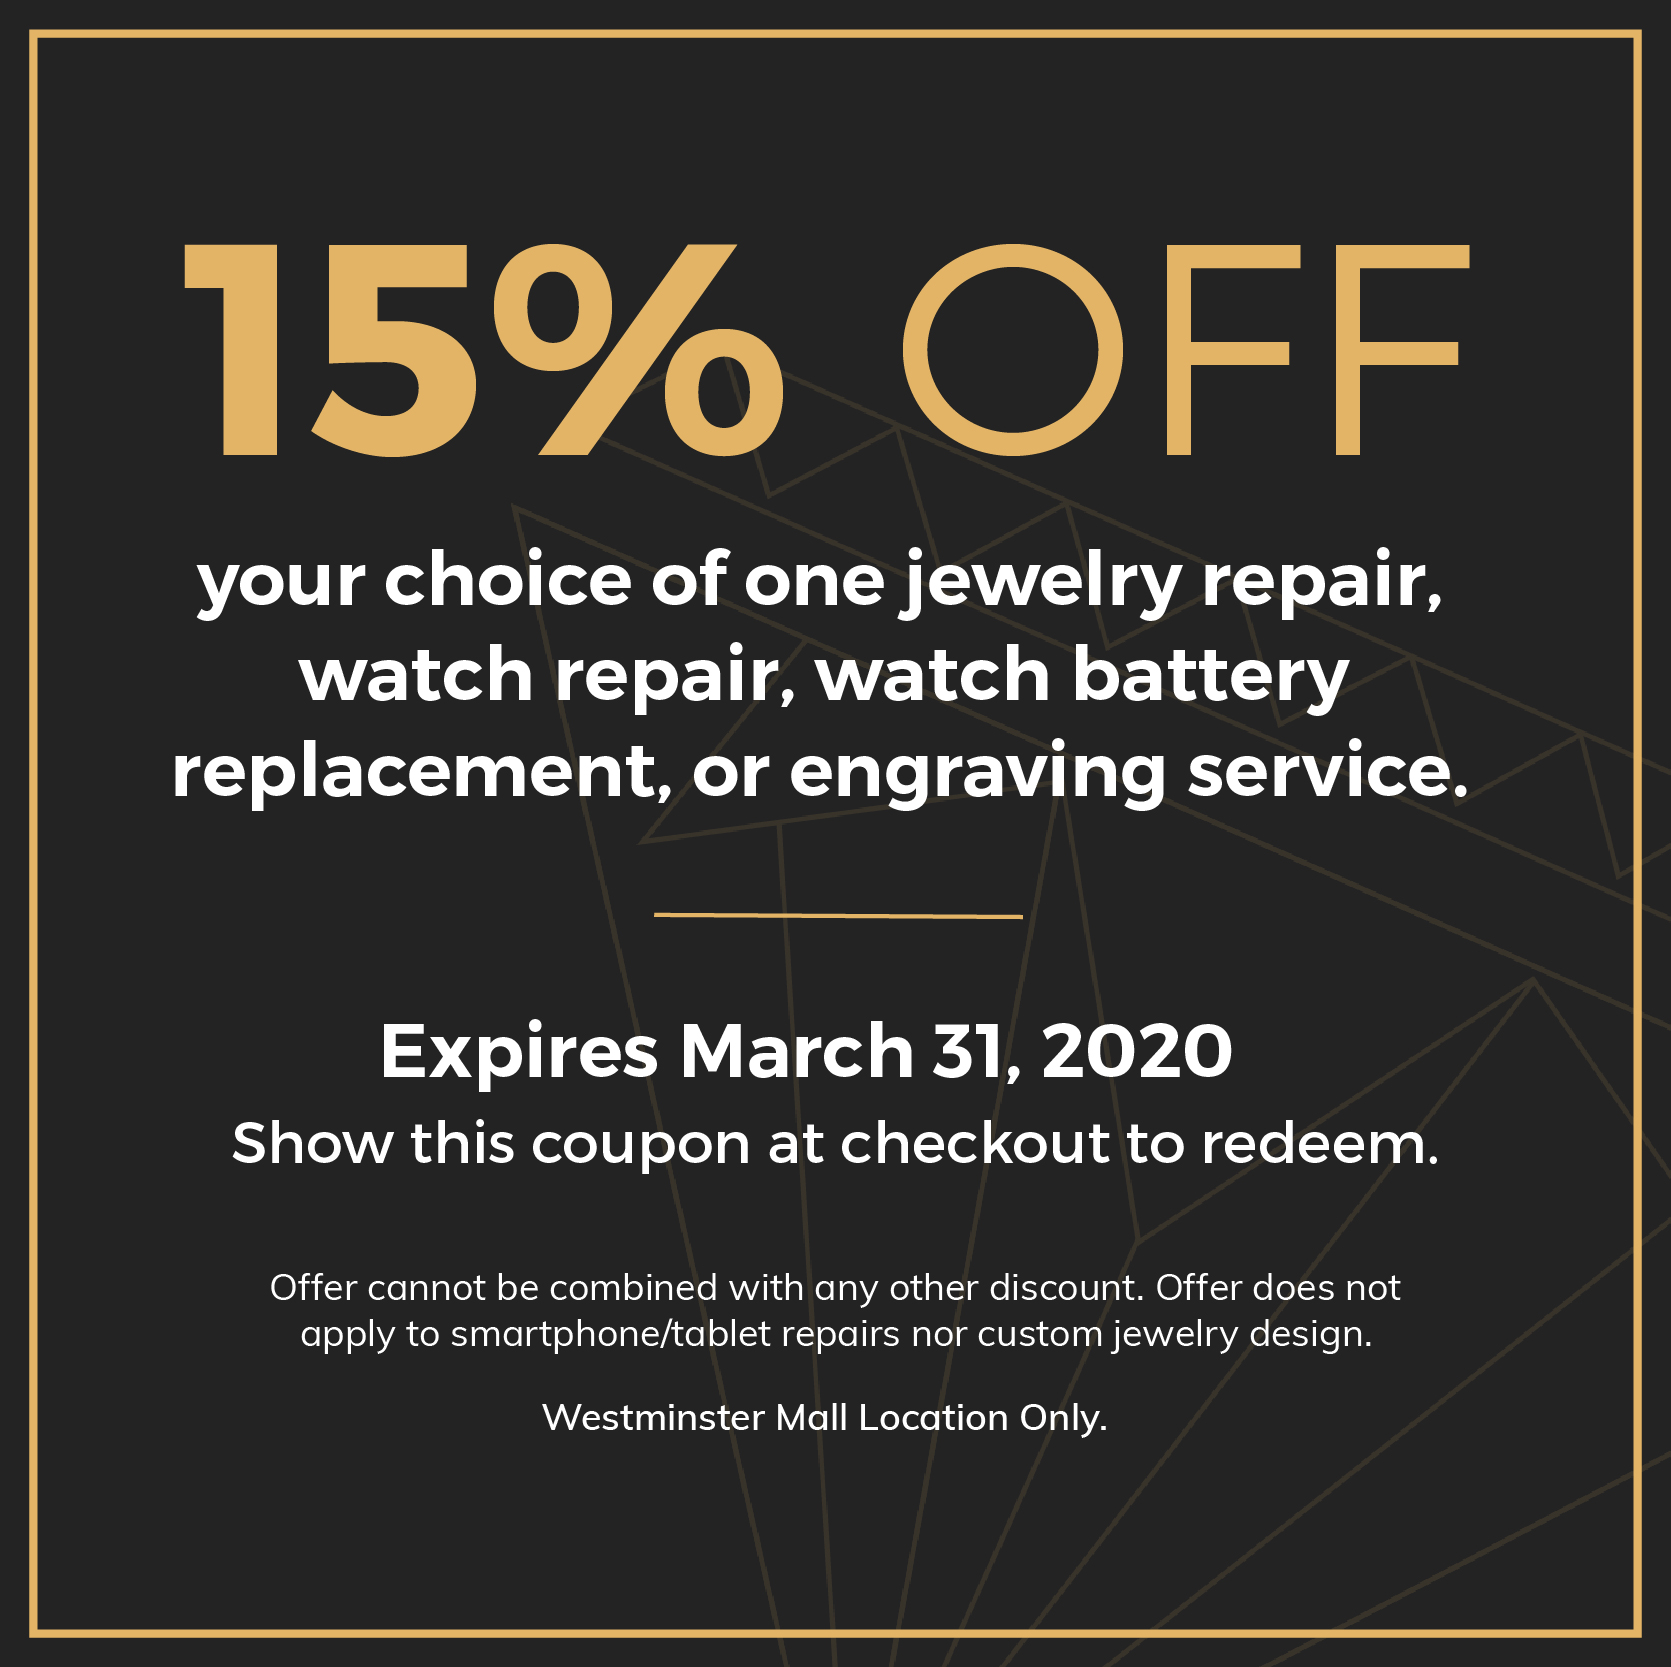 15% OFF. your choice of one jewelry repair, watch repair, watch battery replacement, or engraving service. Expires March 31, 2020. Show this coupon at checkout to redeem. Offer cannot be combined with any other discount. Offer does not apply to smartphone/tablet repairs nor custom jewelry design. Westminster Mall Location Only.